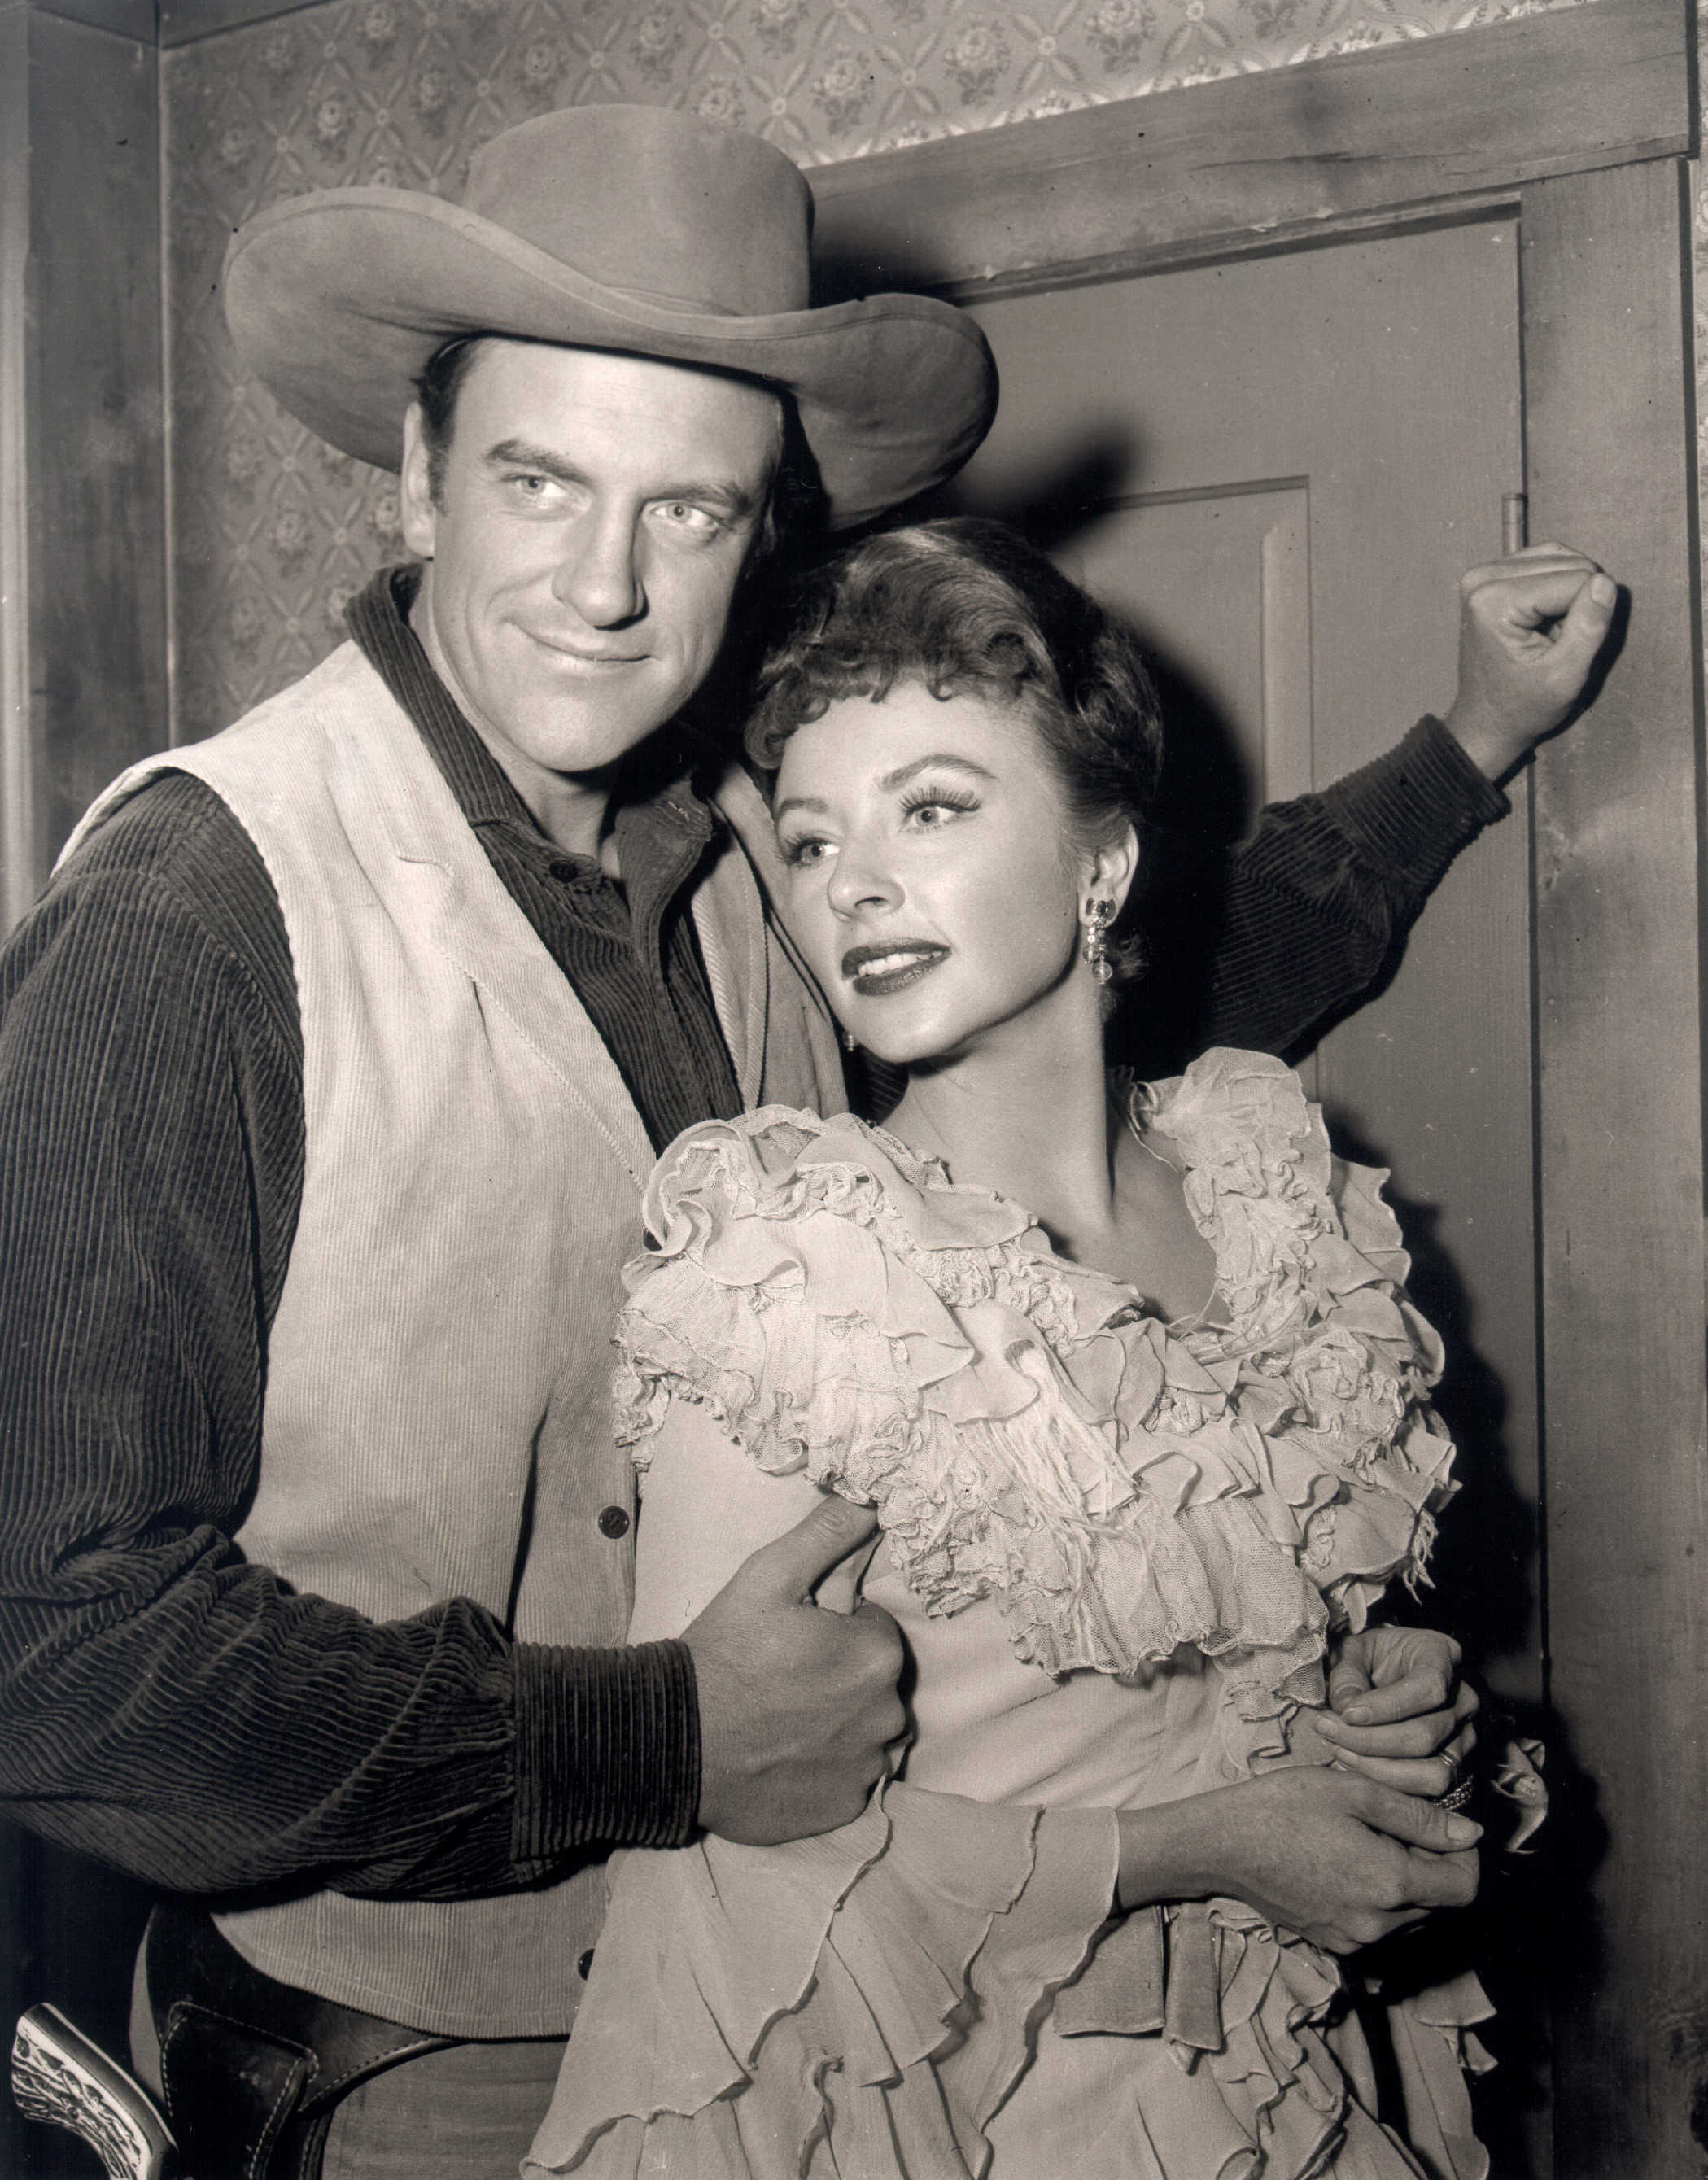 James Arness and Amanda Blake as they embrace and pose in costume from the CBS television western "Gunsmoke" on December 11, 1956. | Source: Getty Images